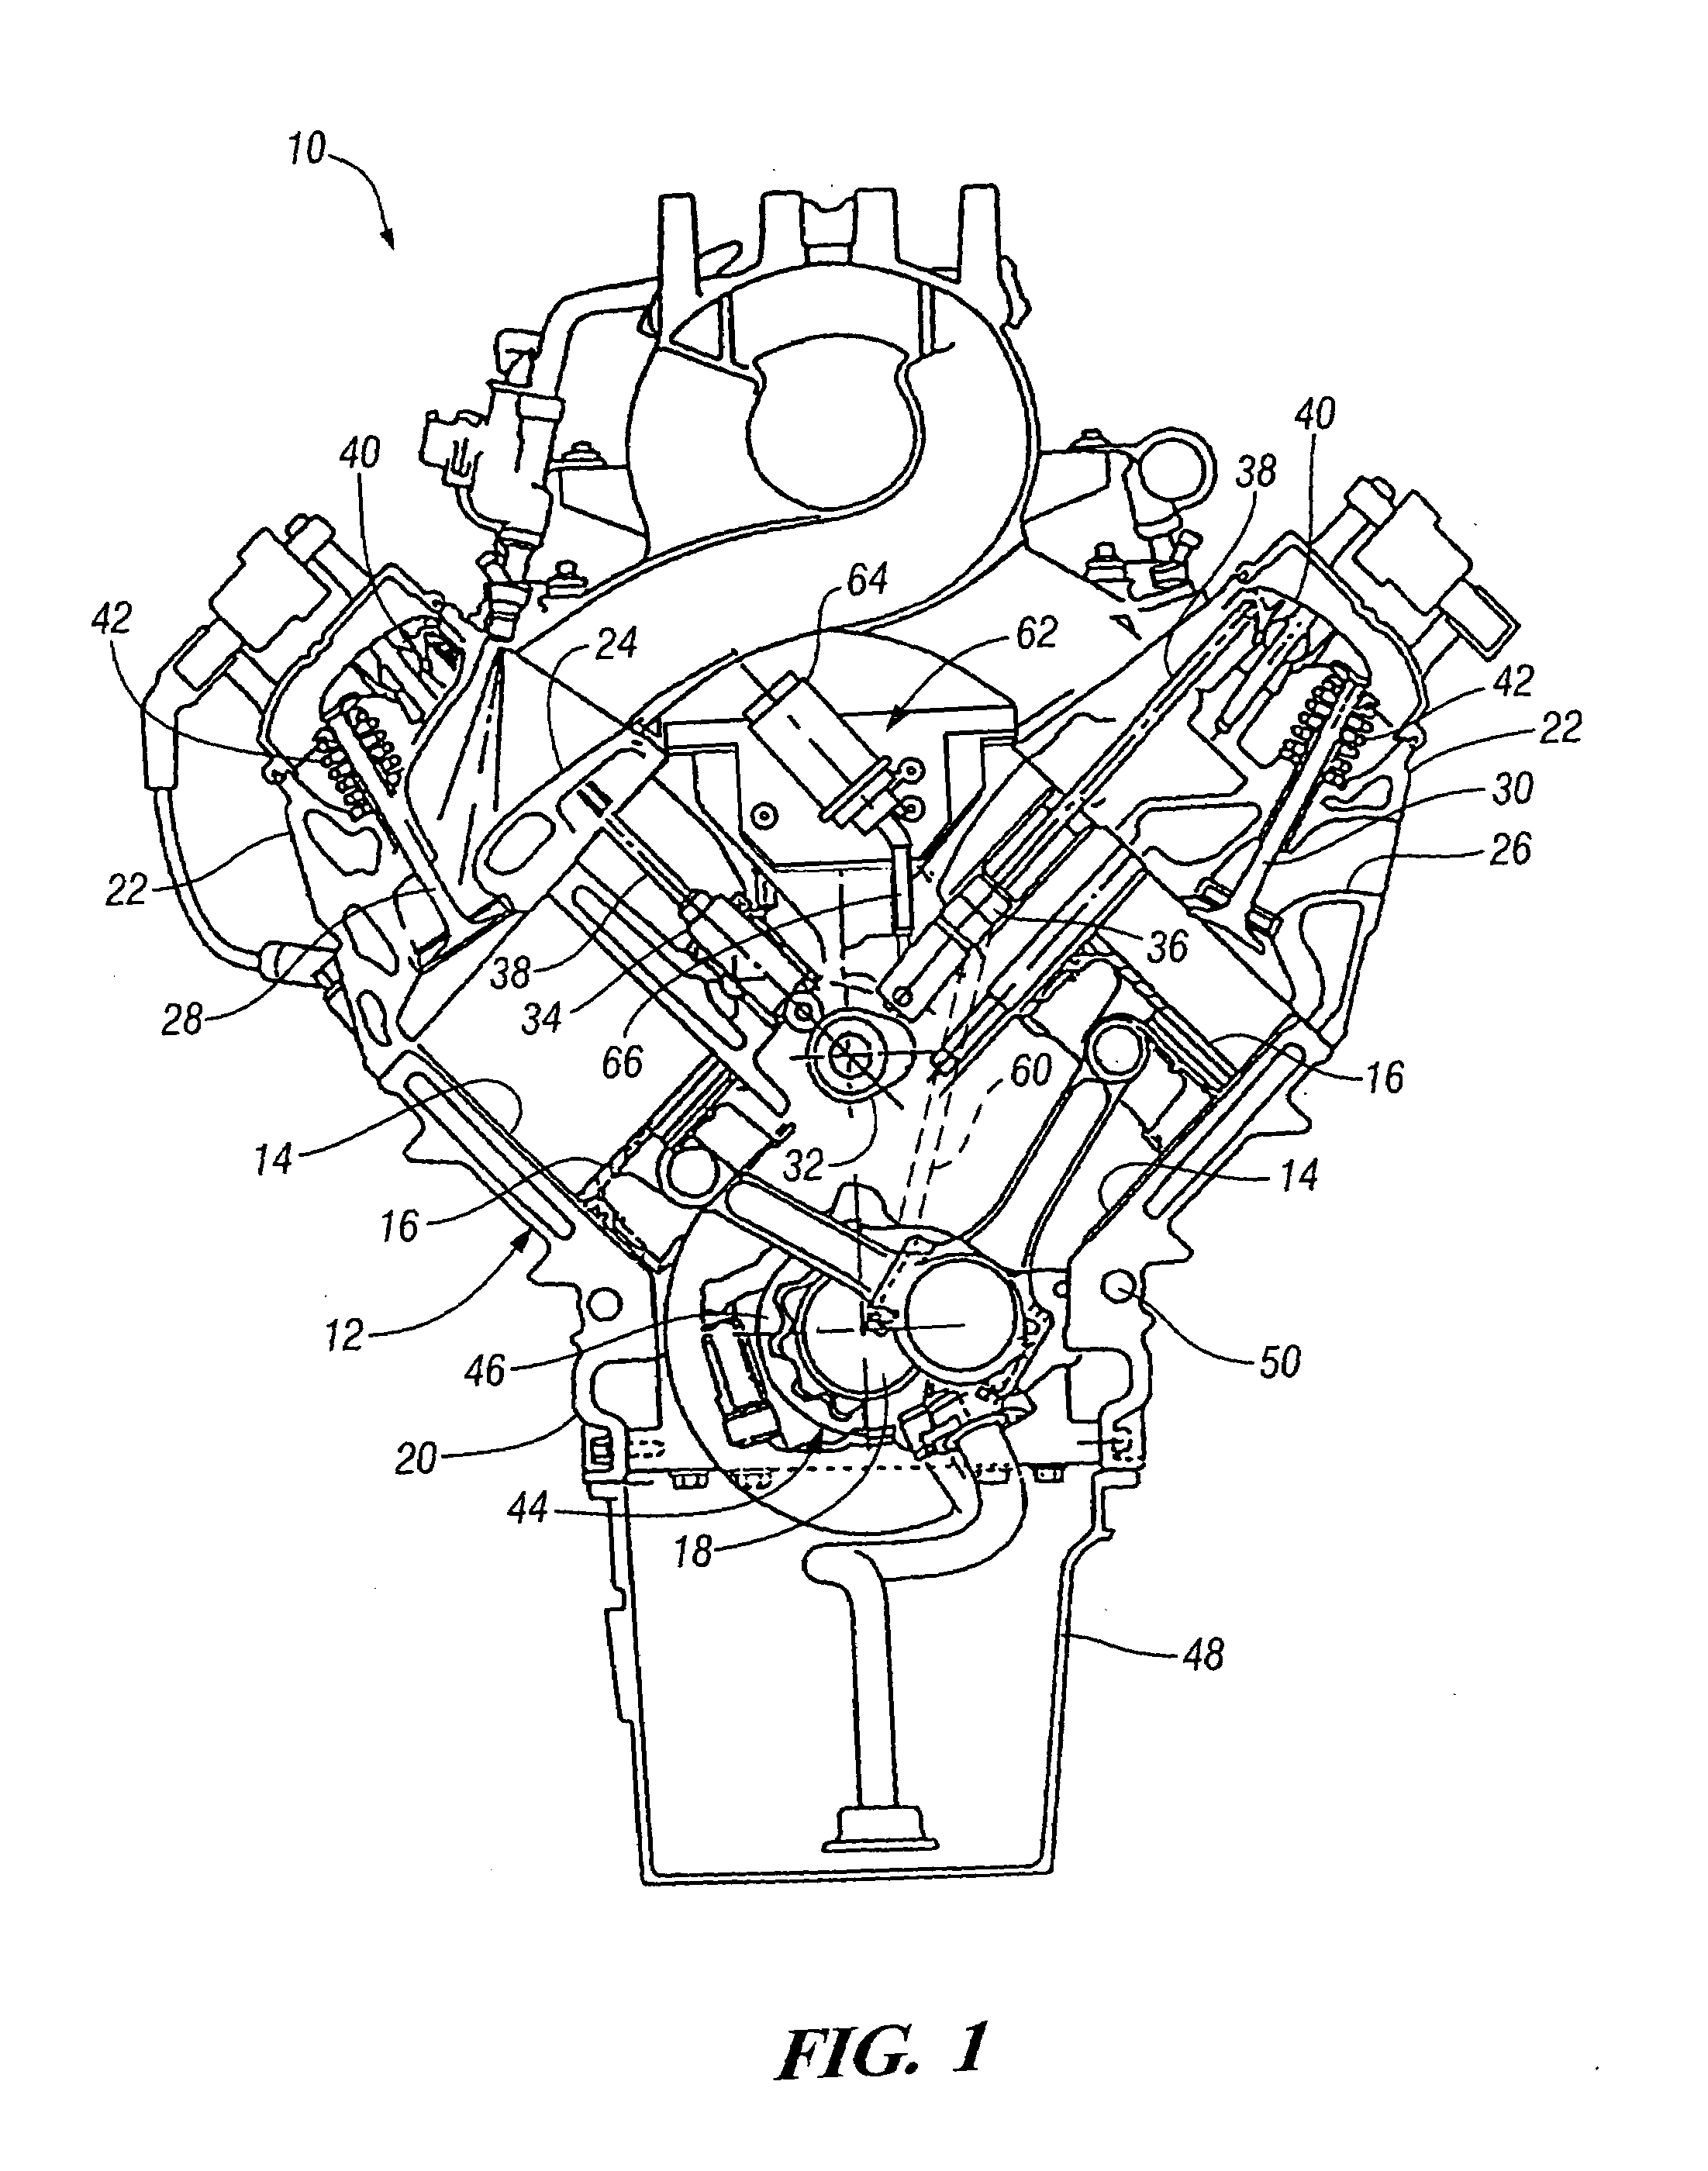 Oil pressure control system and method for engines with hydraulic cylinder deactivation